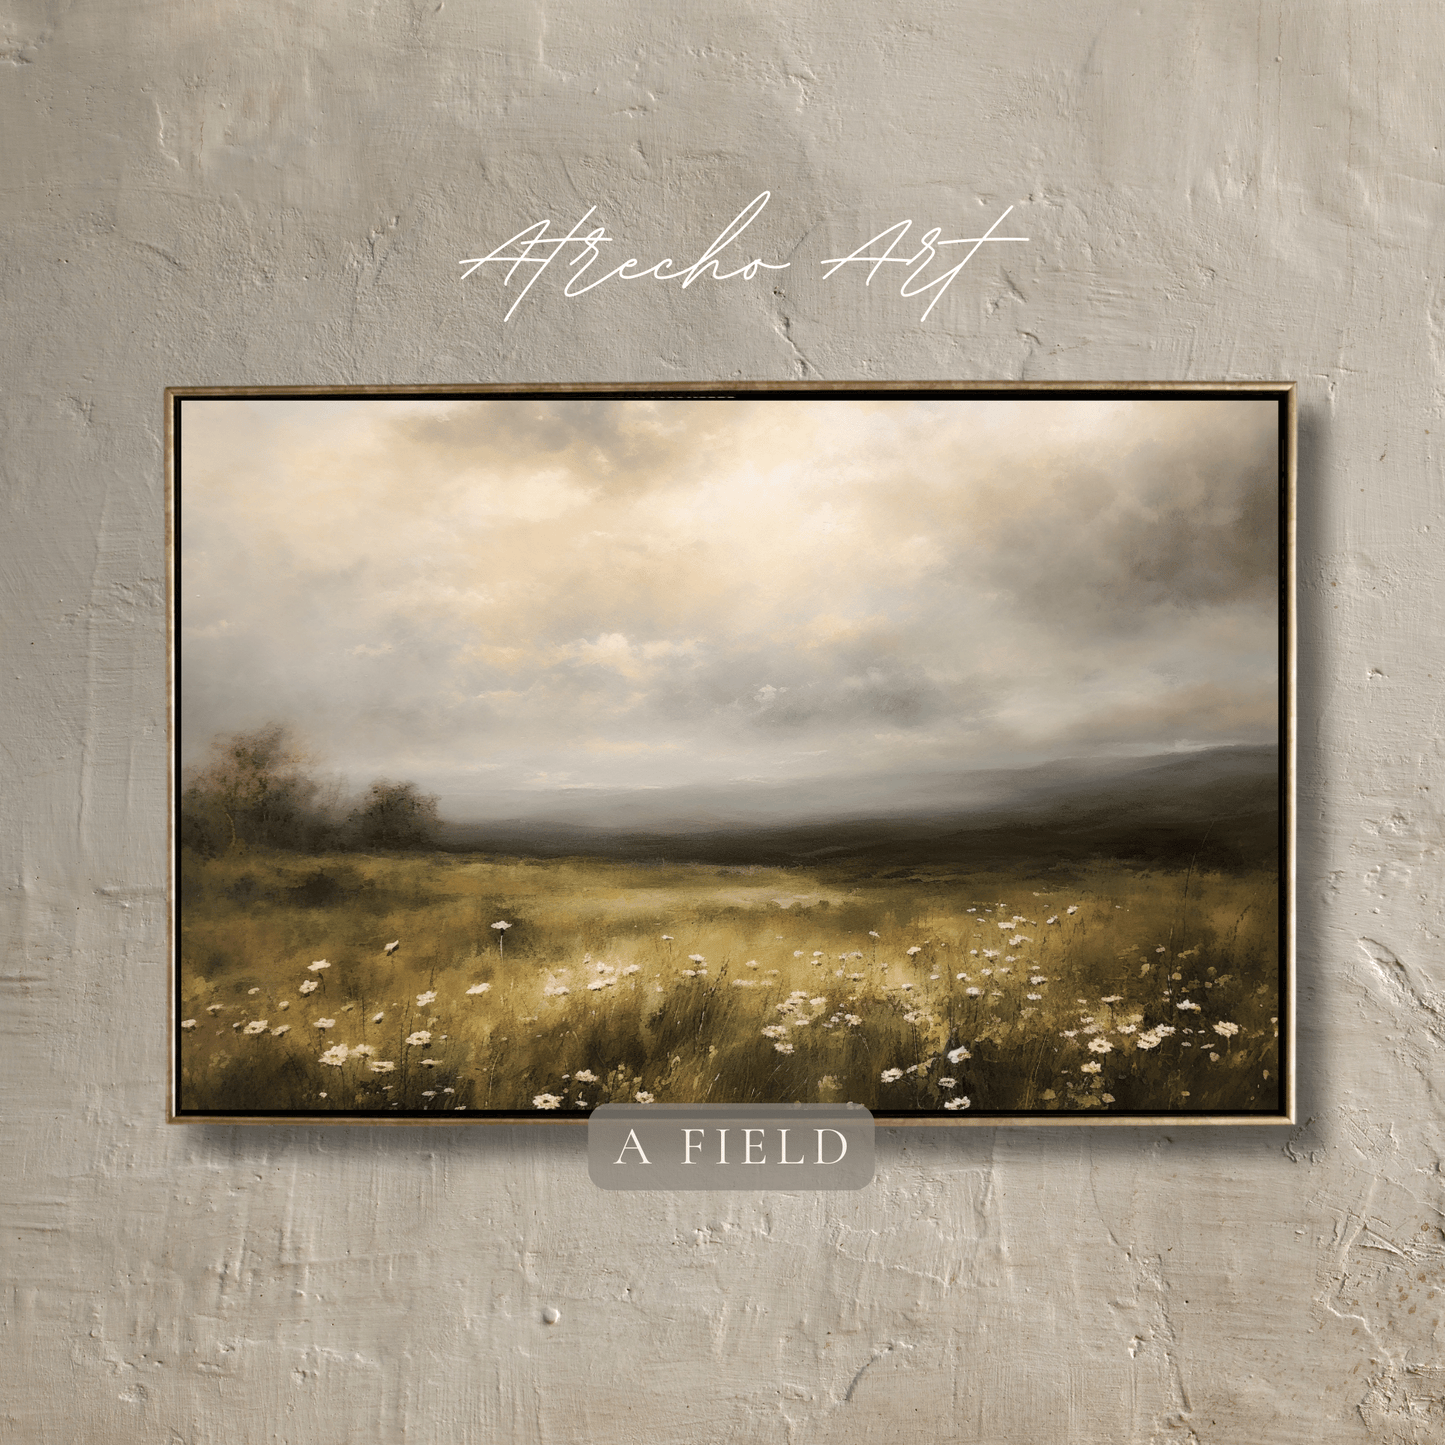 FIELD | Printed Artwork | L083 Landscape Wall Art | Light Academia Poster | Printed Vintage Oil Painting